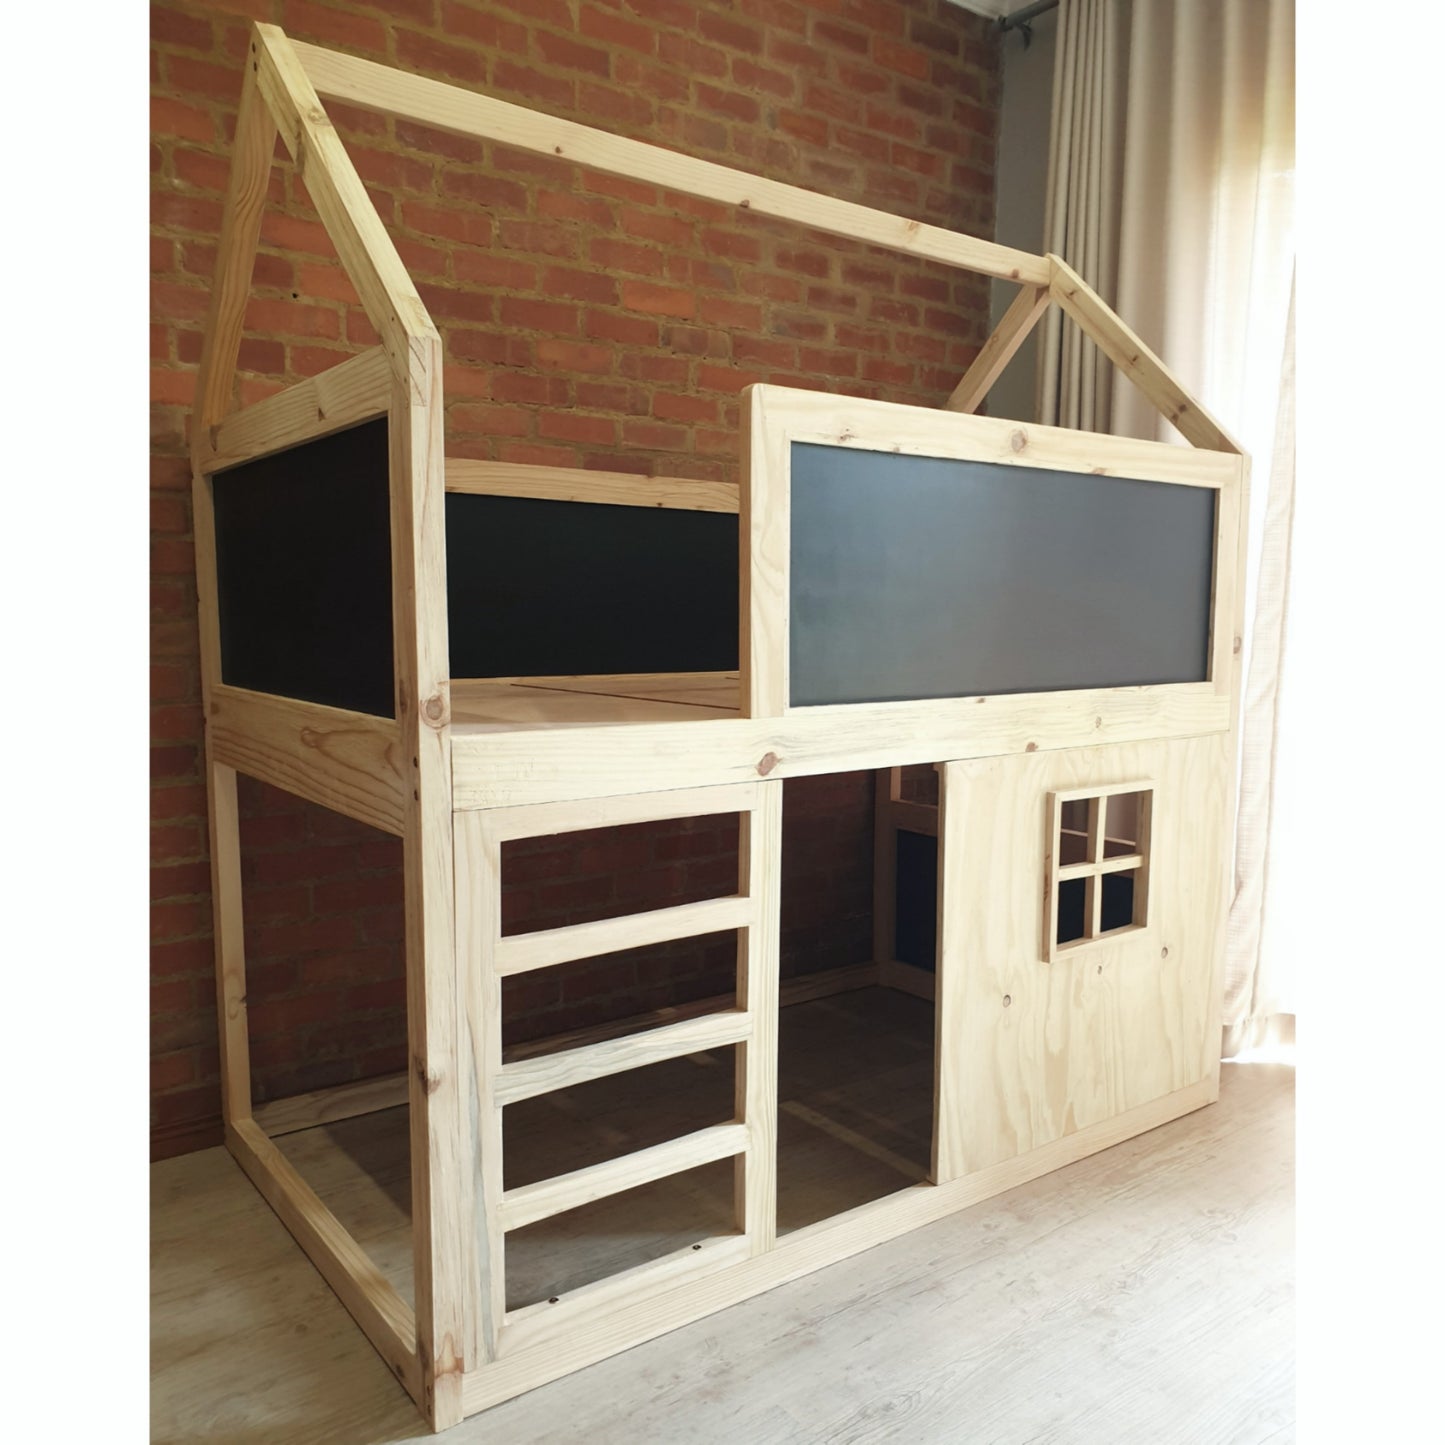 House Top Bunk Bed with Window and Chalkboard Panels -